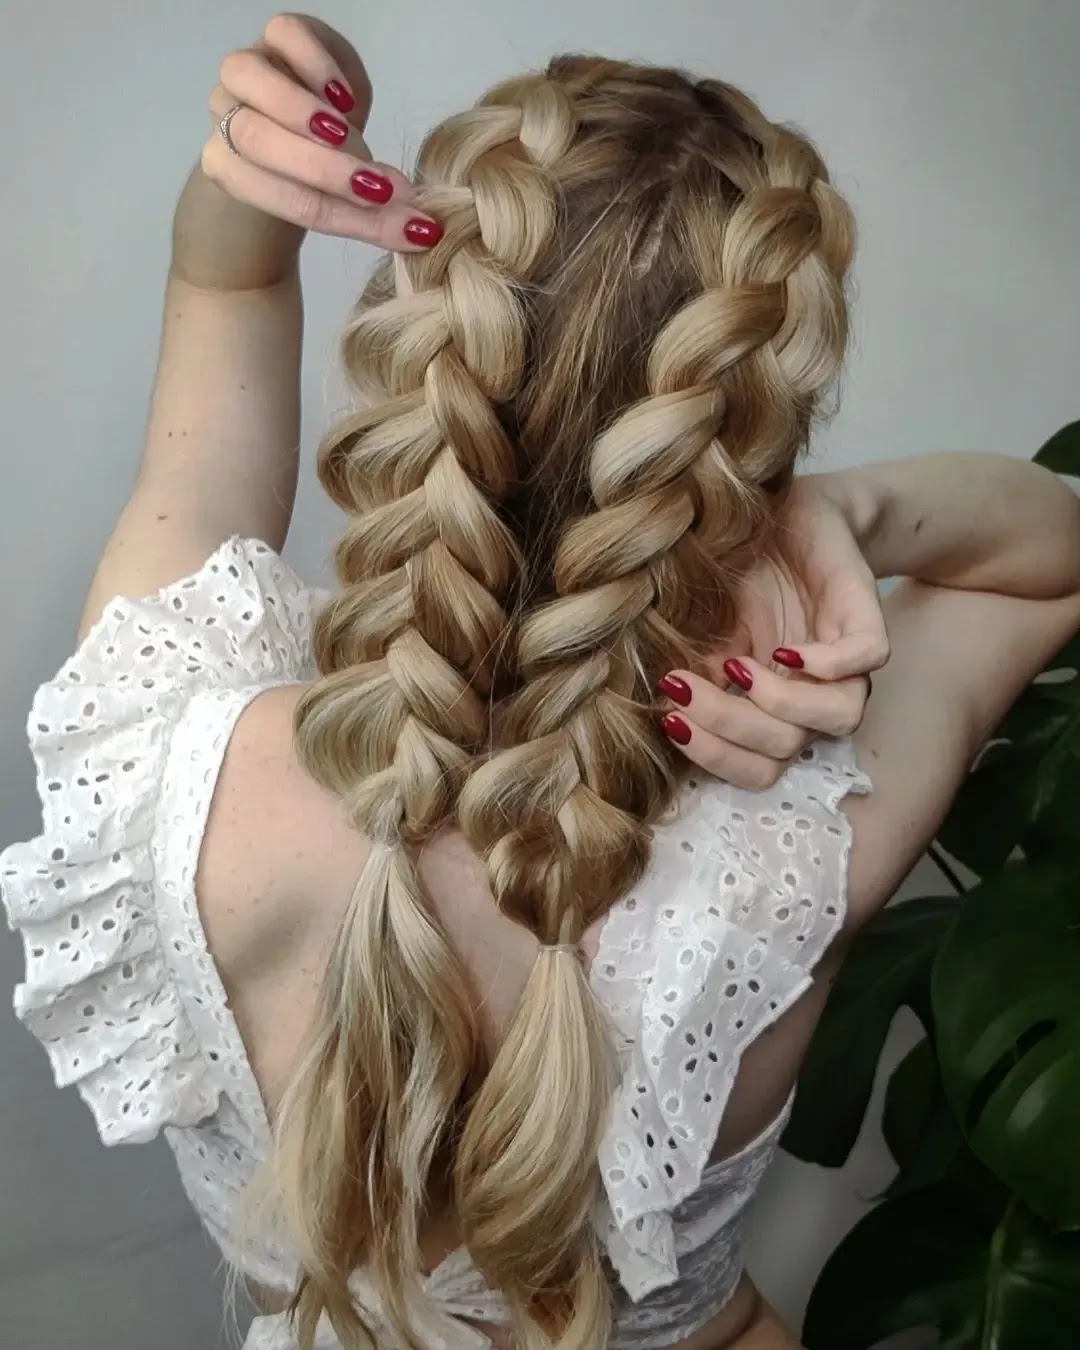 The Dutch braid, as the name suggests, originates from the Netherlands. Though its origins can be traced back to early times, its appeal has not ...